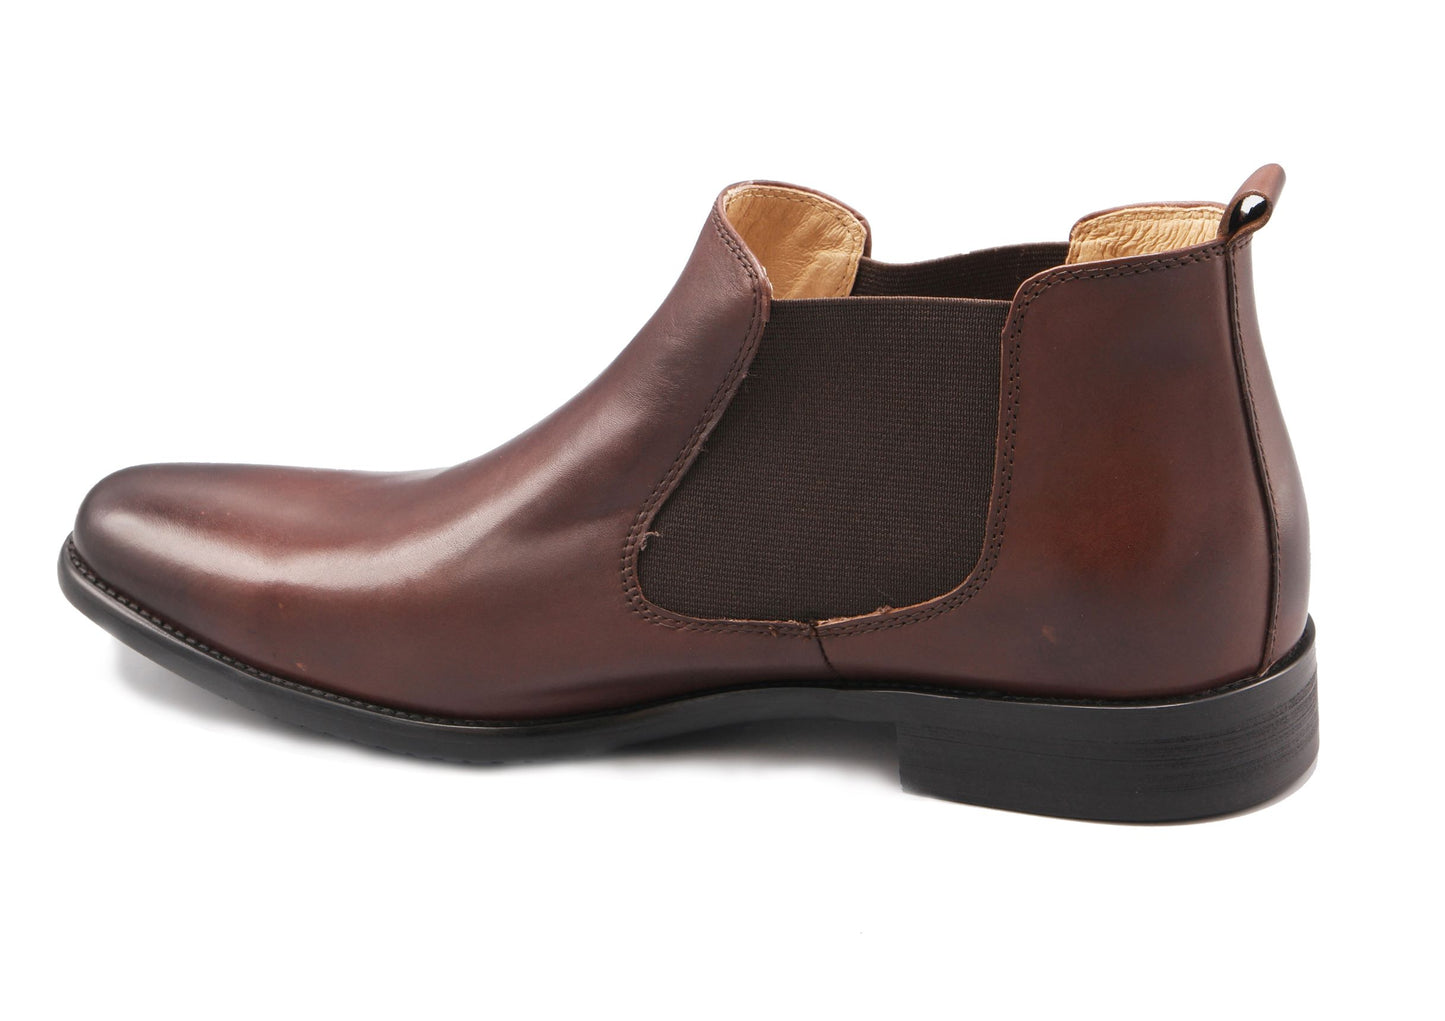 Cutler & Co - Anthony Boot - Black or Brown